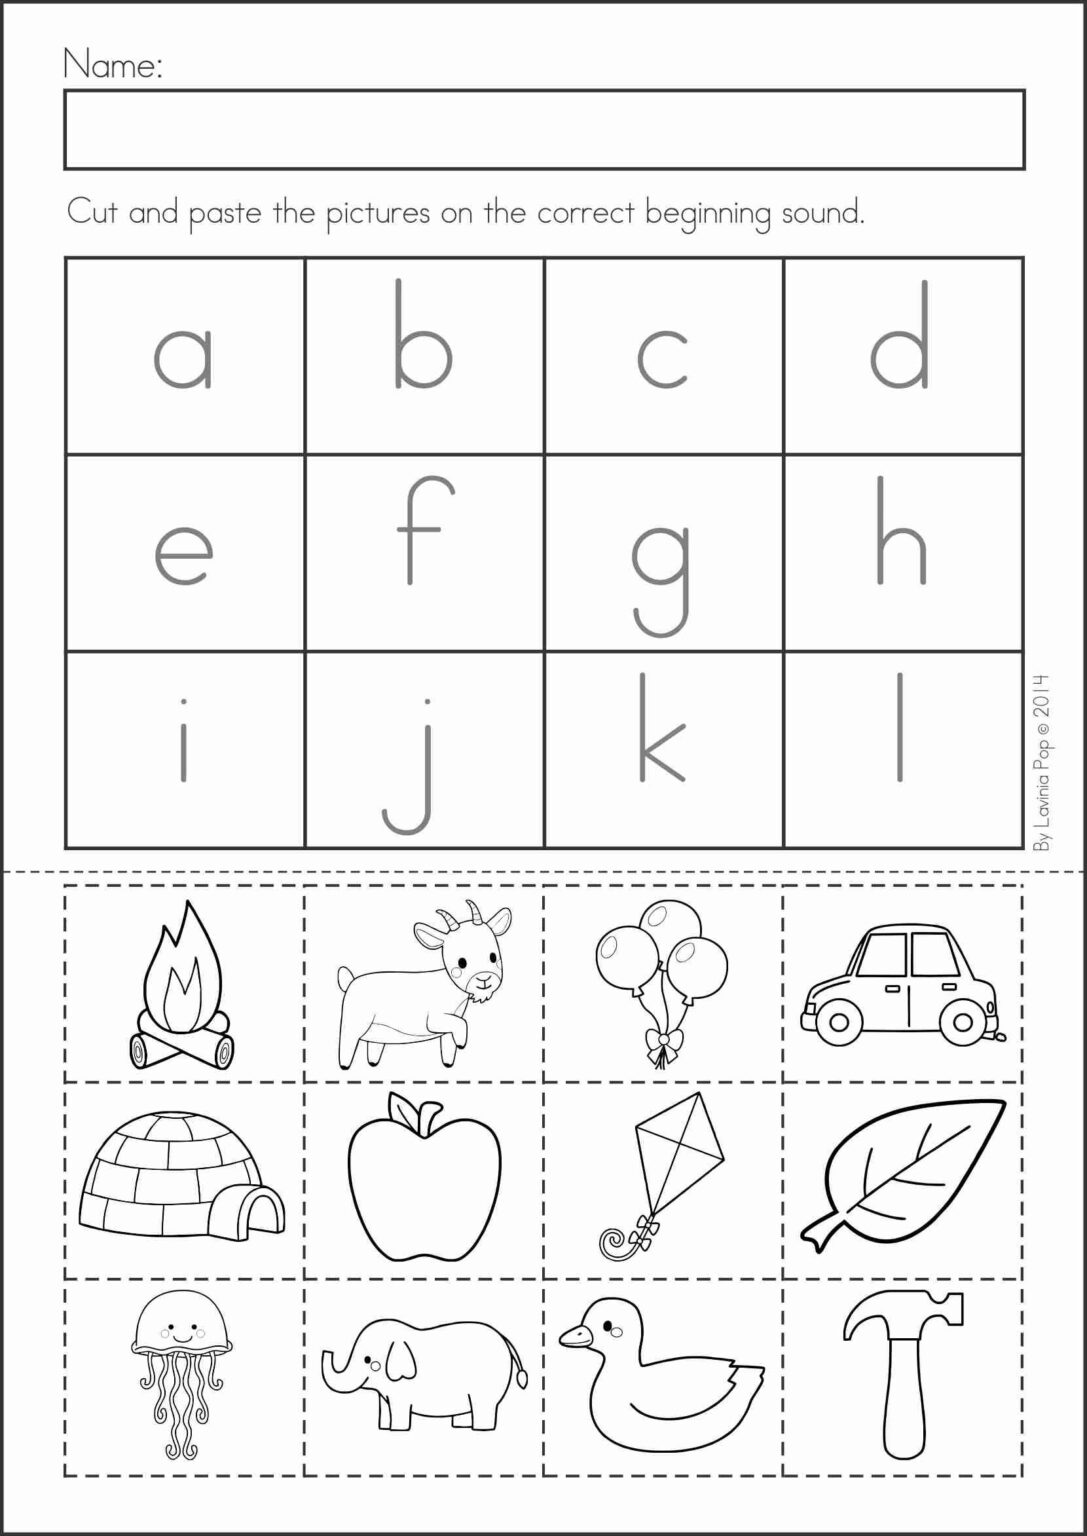 free-cut-and-paste-money-worksheets